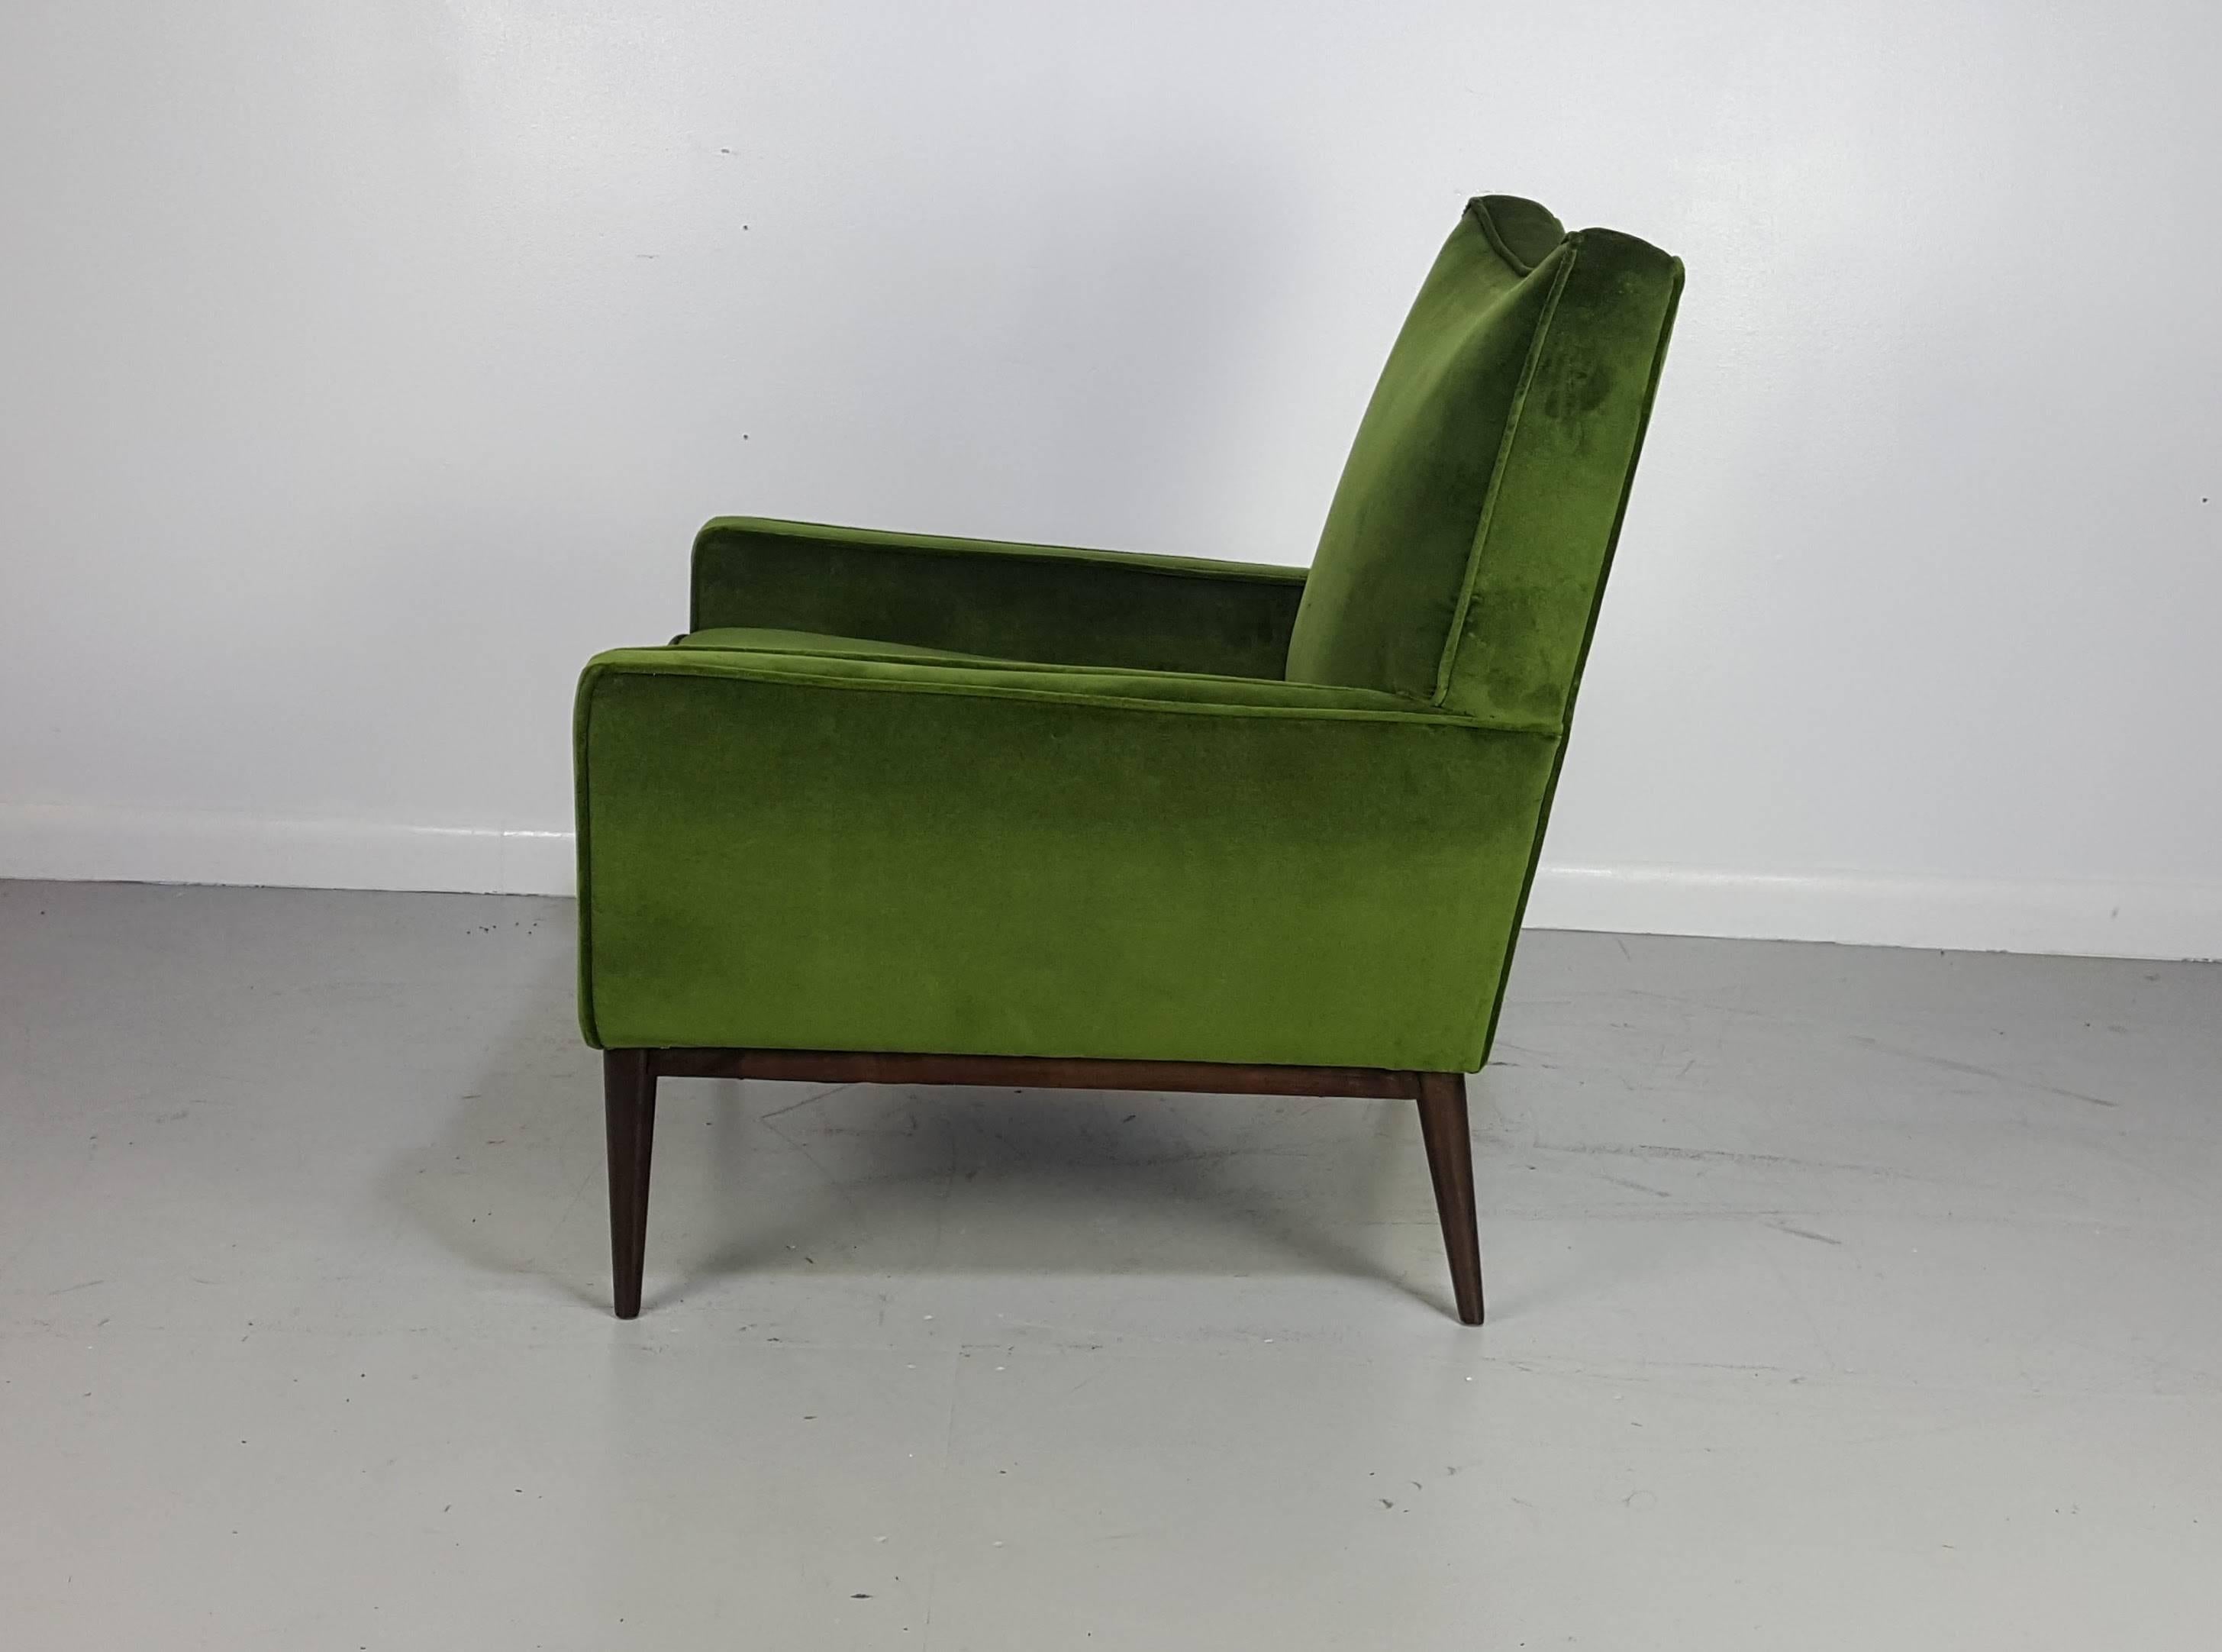 Lounge chair by Paul McCobb in lush green velvet, 1950s.

See this item in our private NYC showroom! Refine Limited is located in the heart of Chelsea at the history Starrett-LeHigh Building, 601 West 26th Street, Suite M258. Please call us to